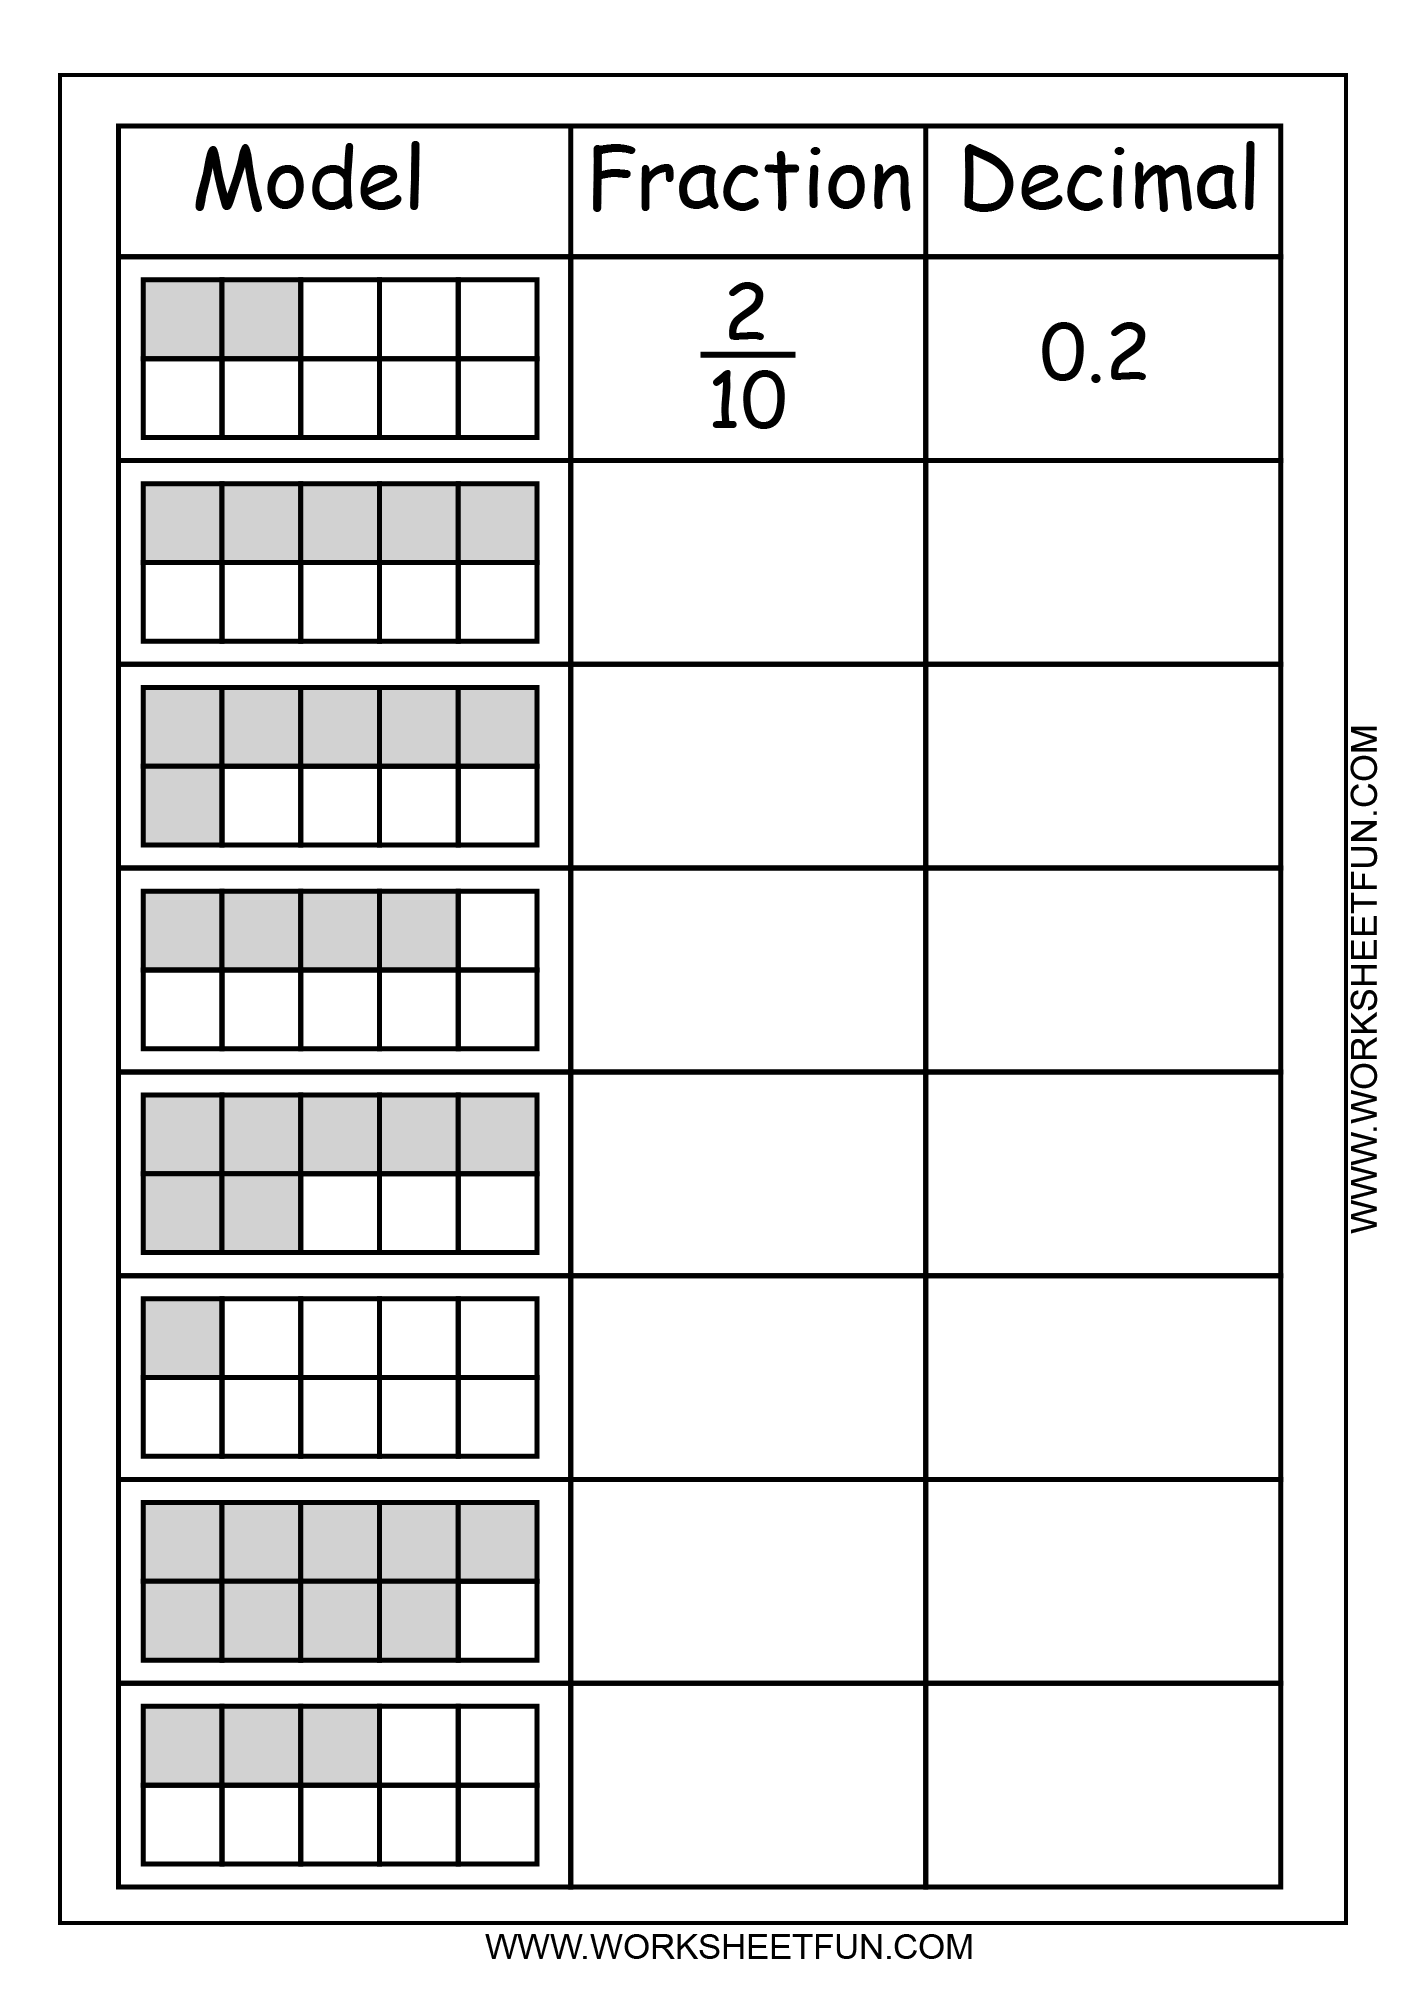 Whole Numbers Fractions And Decimals Worksheets